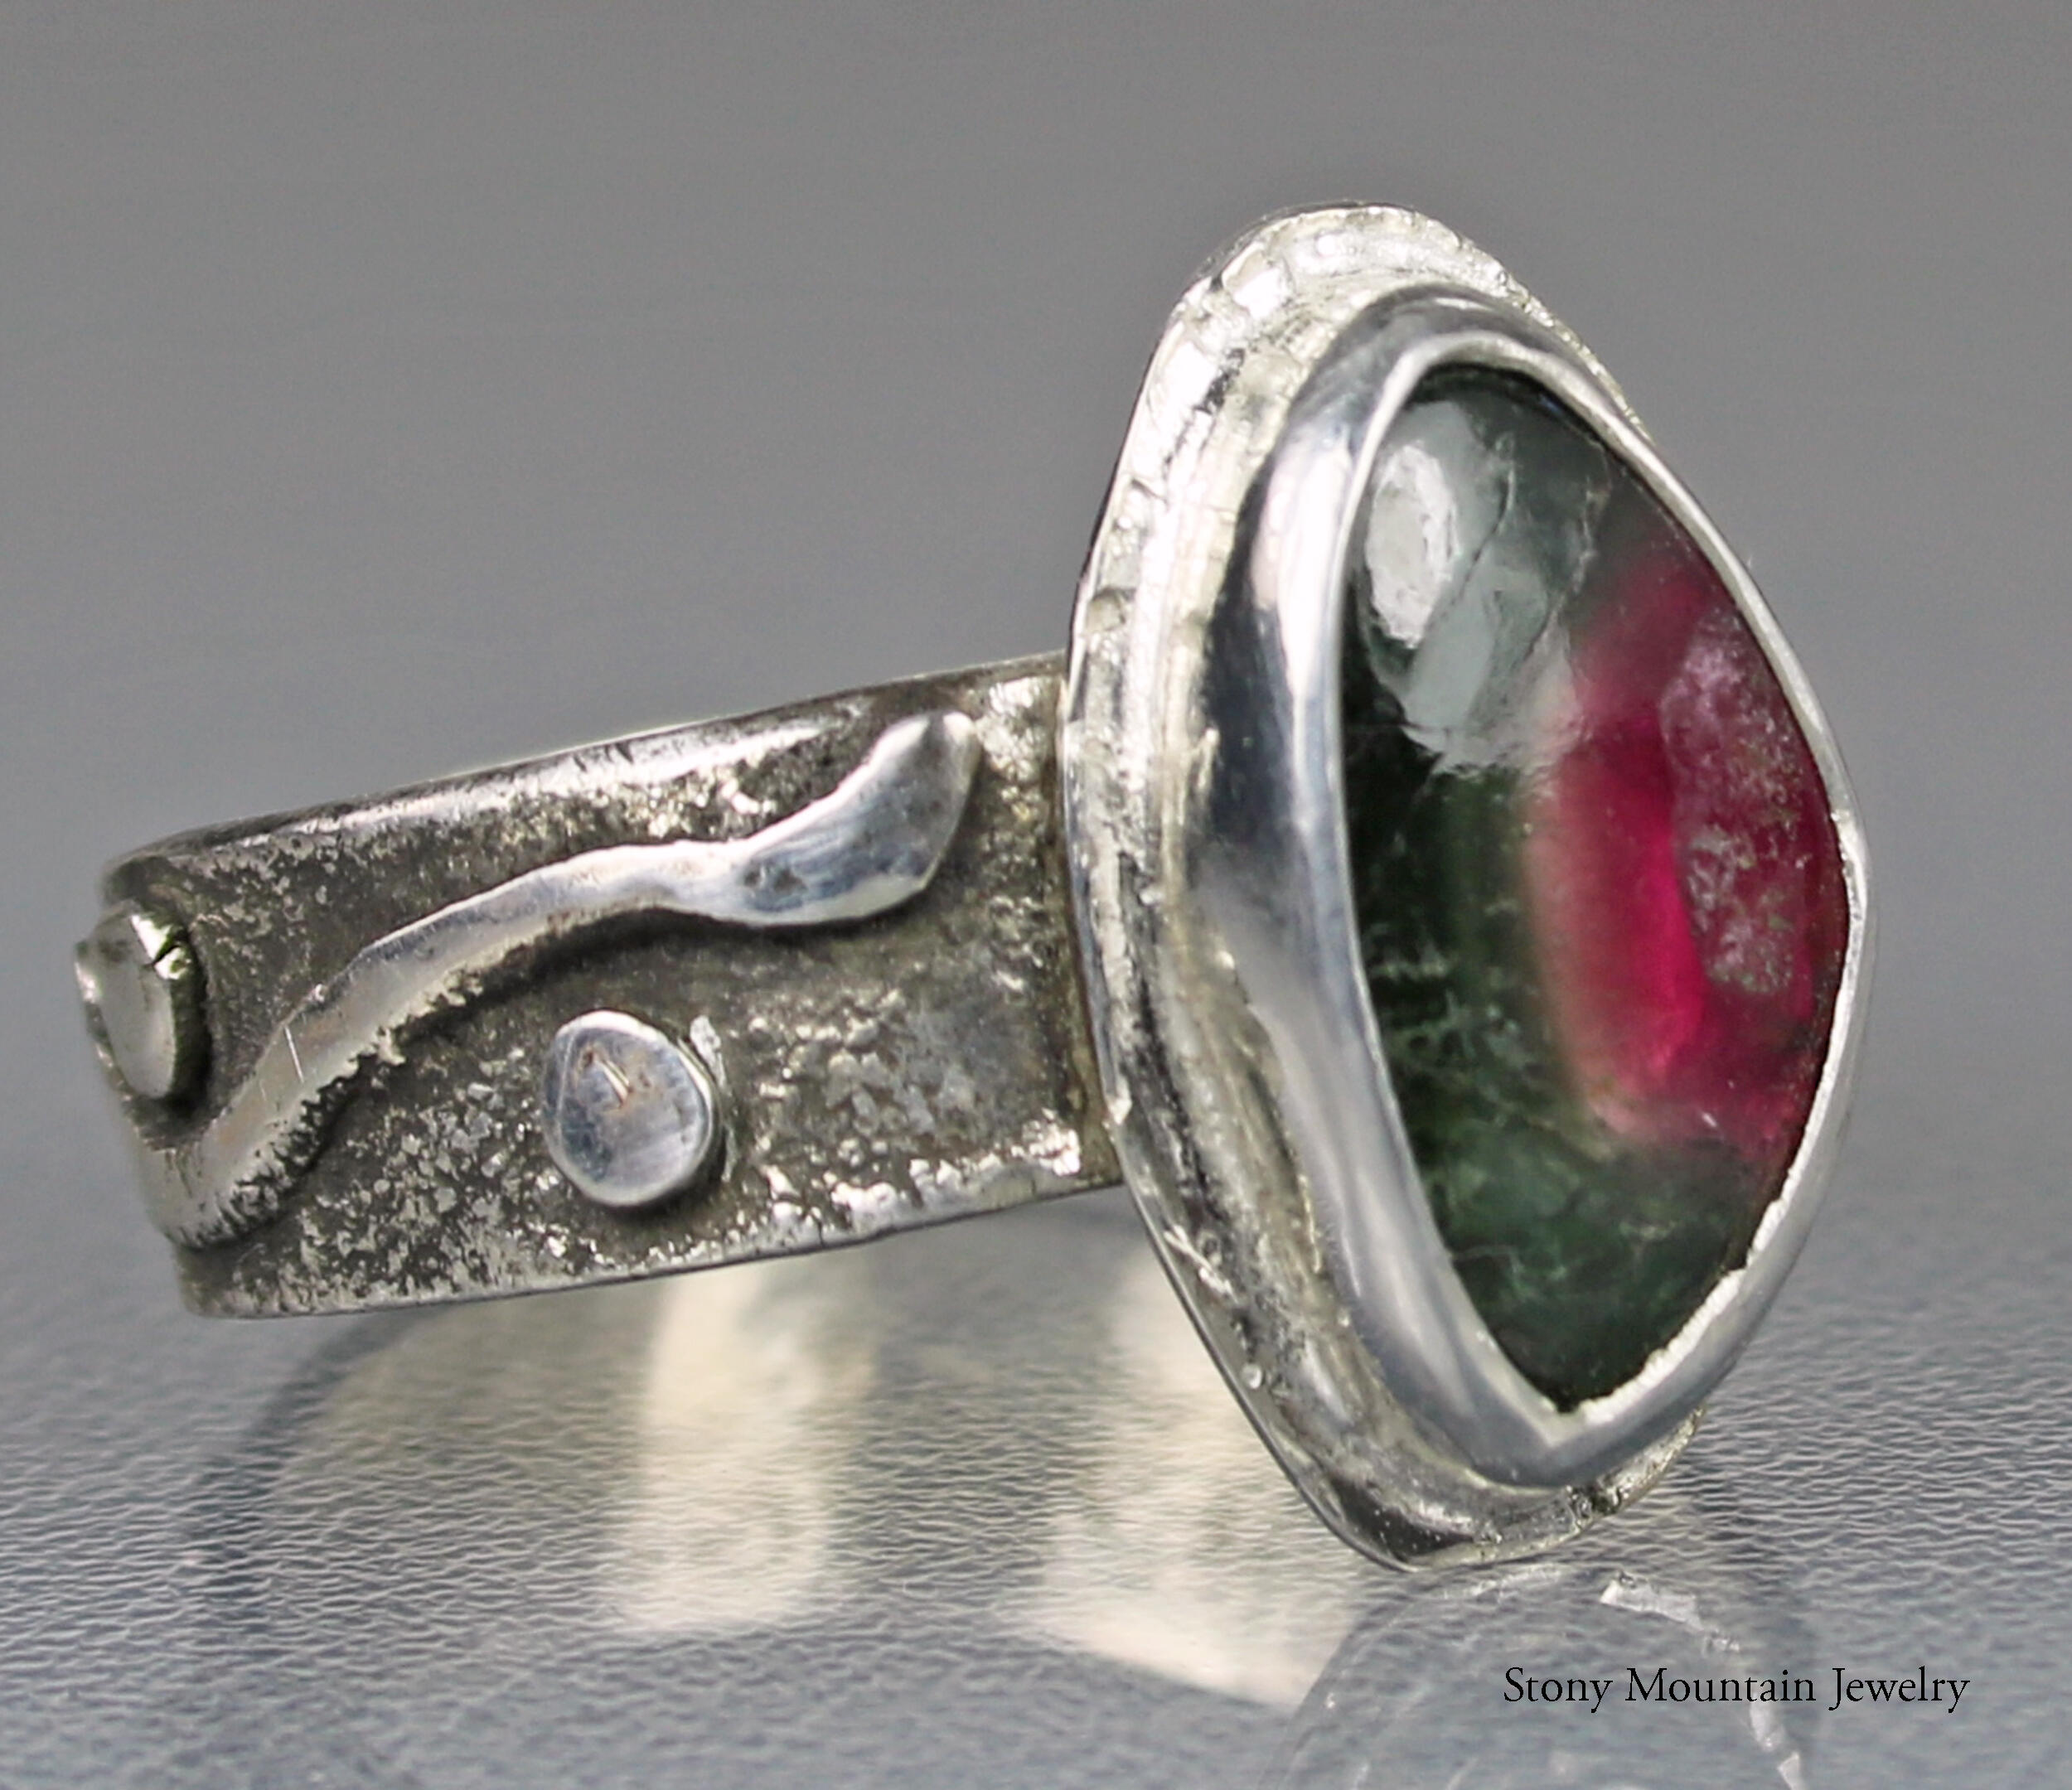 Watermelon Tourmaline Cocktail Ring Sterling Silver Tourmaline Ring Pink Tourmaline Ring Green Tourmaline Ring Watermelon Tourmaline Ring